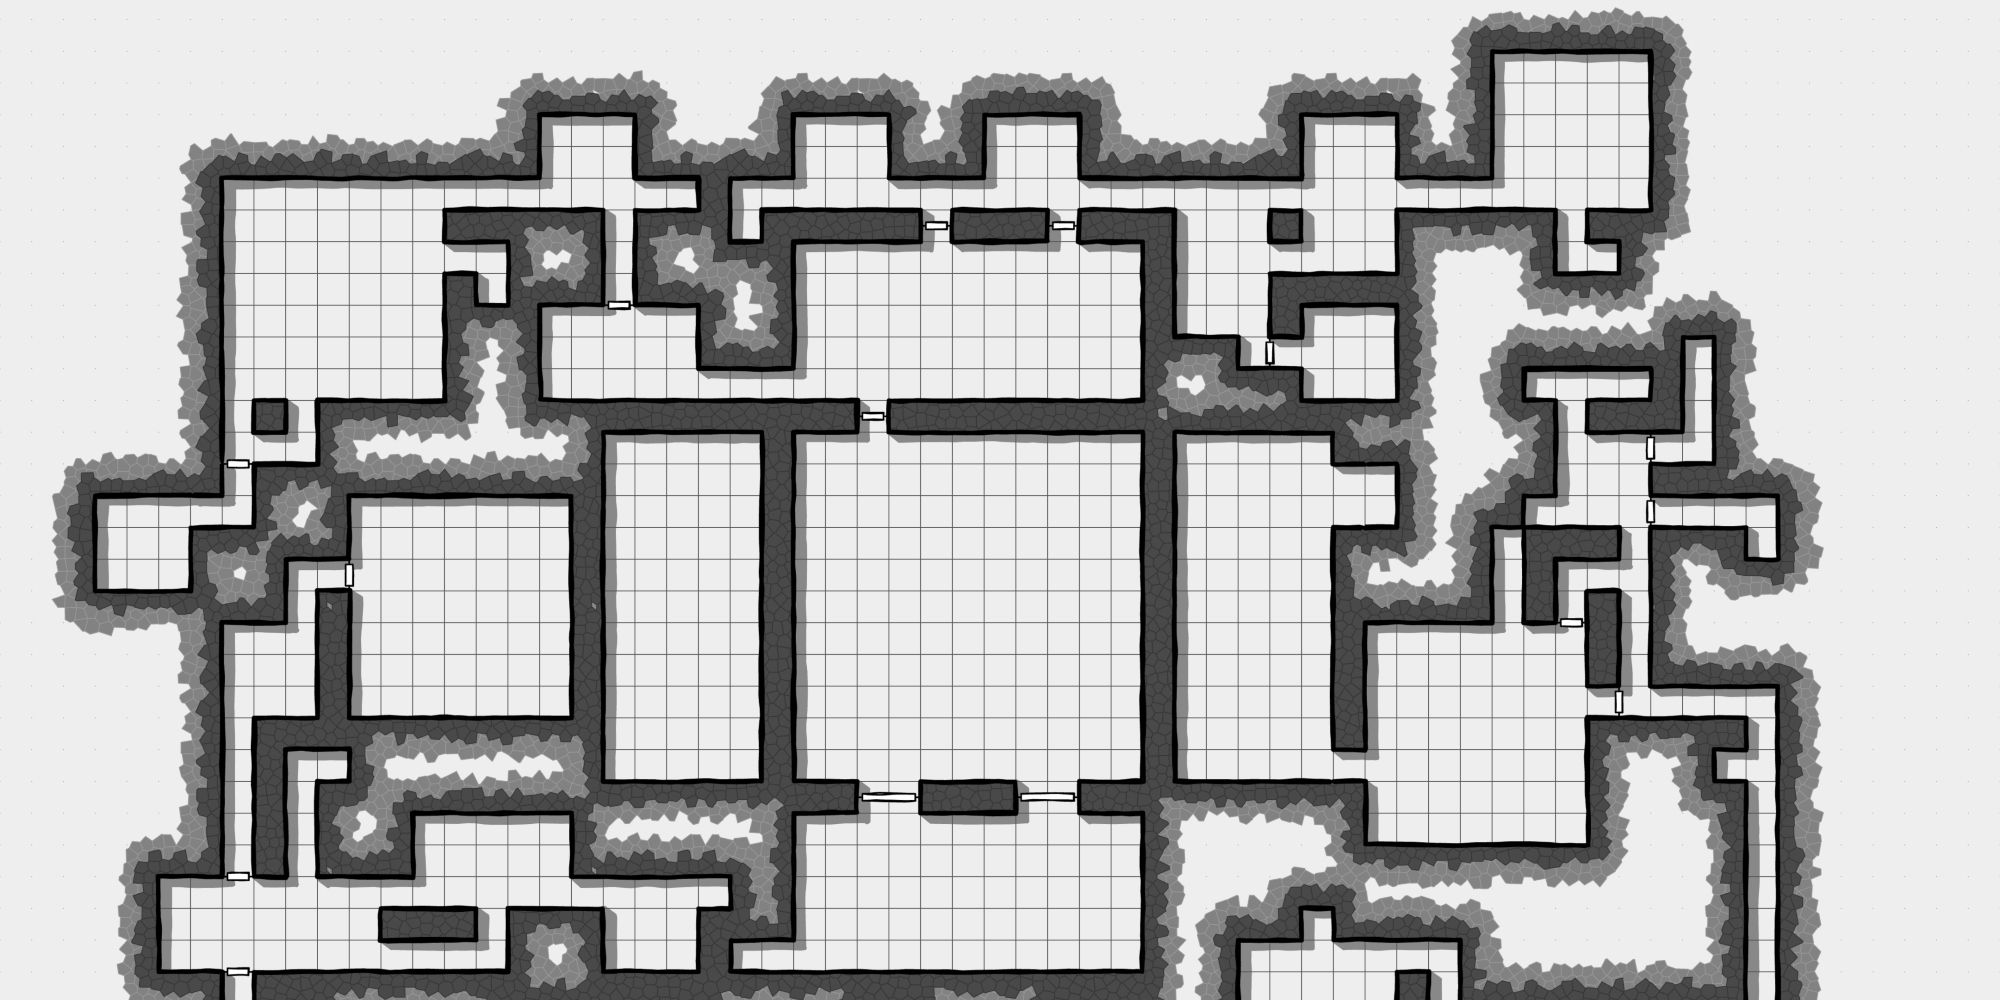 Black and white dungeon map with grid lines in the room